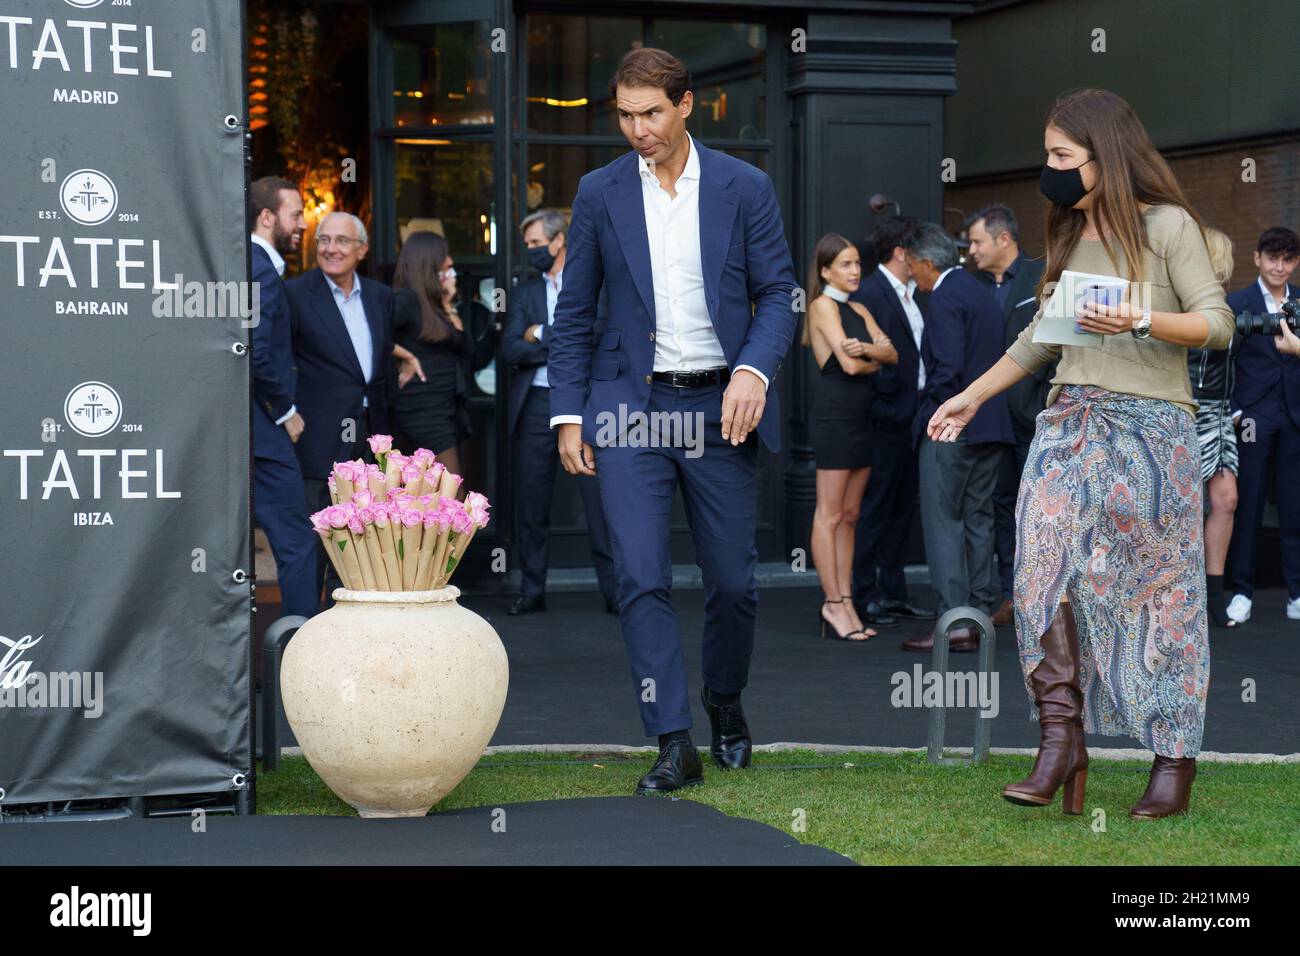 Madrid, Spain. 19th Oct, 2021. Rafa Nadal (L) attends the presentation of the new Tatel restaurant in Beverly Hills, Madrid. (Photo by Atilano Garcia/SOPA Images/Sipa USA) Credit: Sipa USA/Alamy Live News Stock Photo